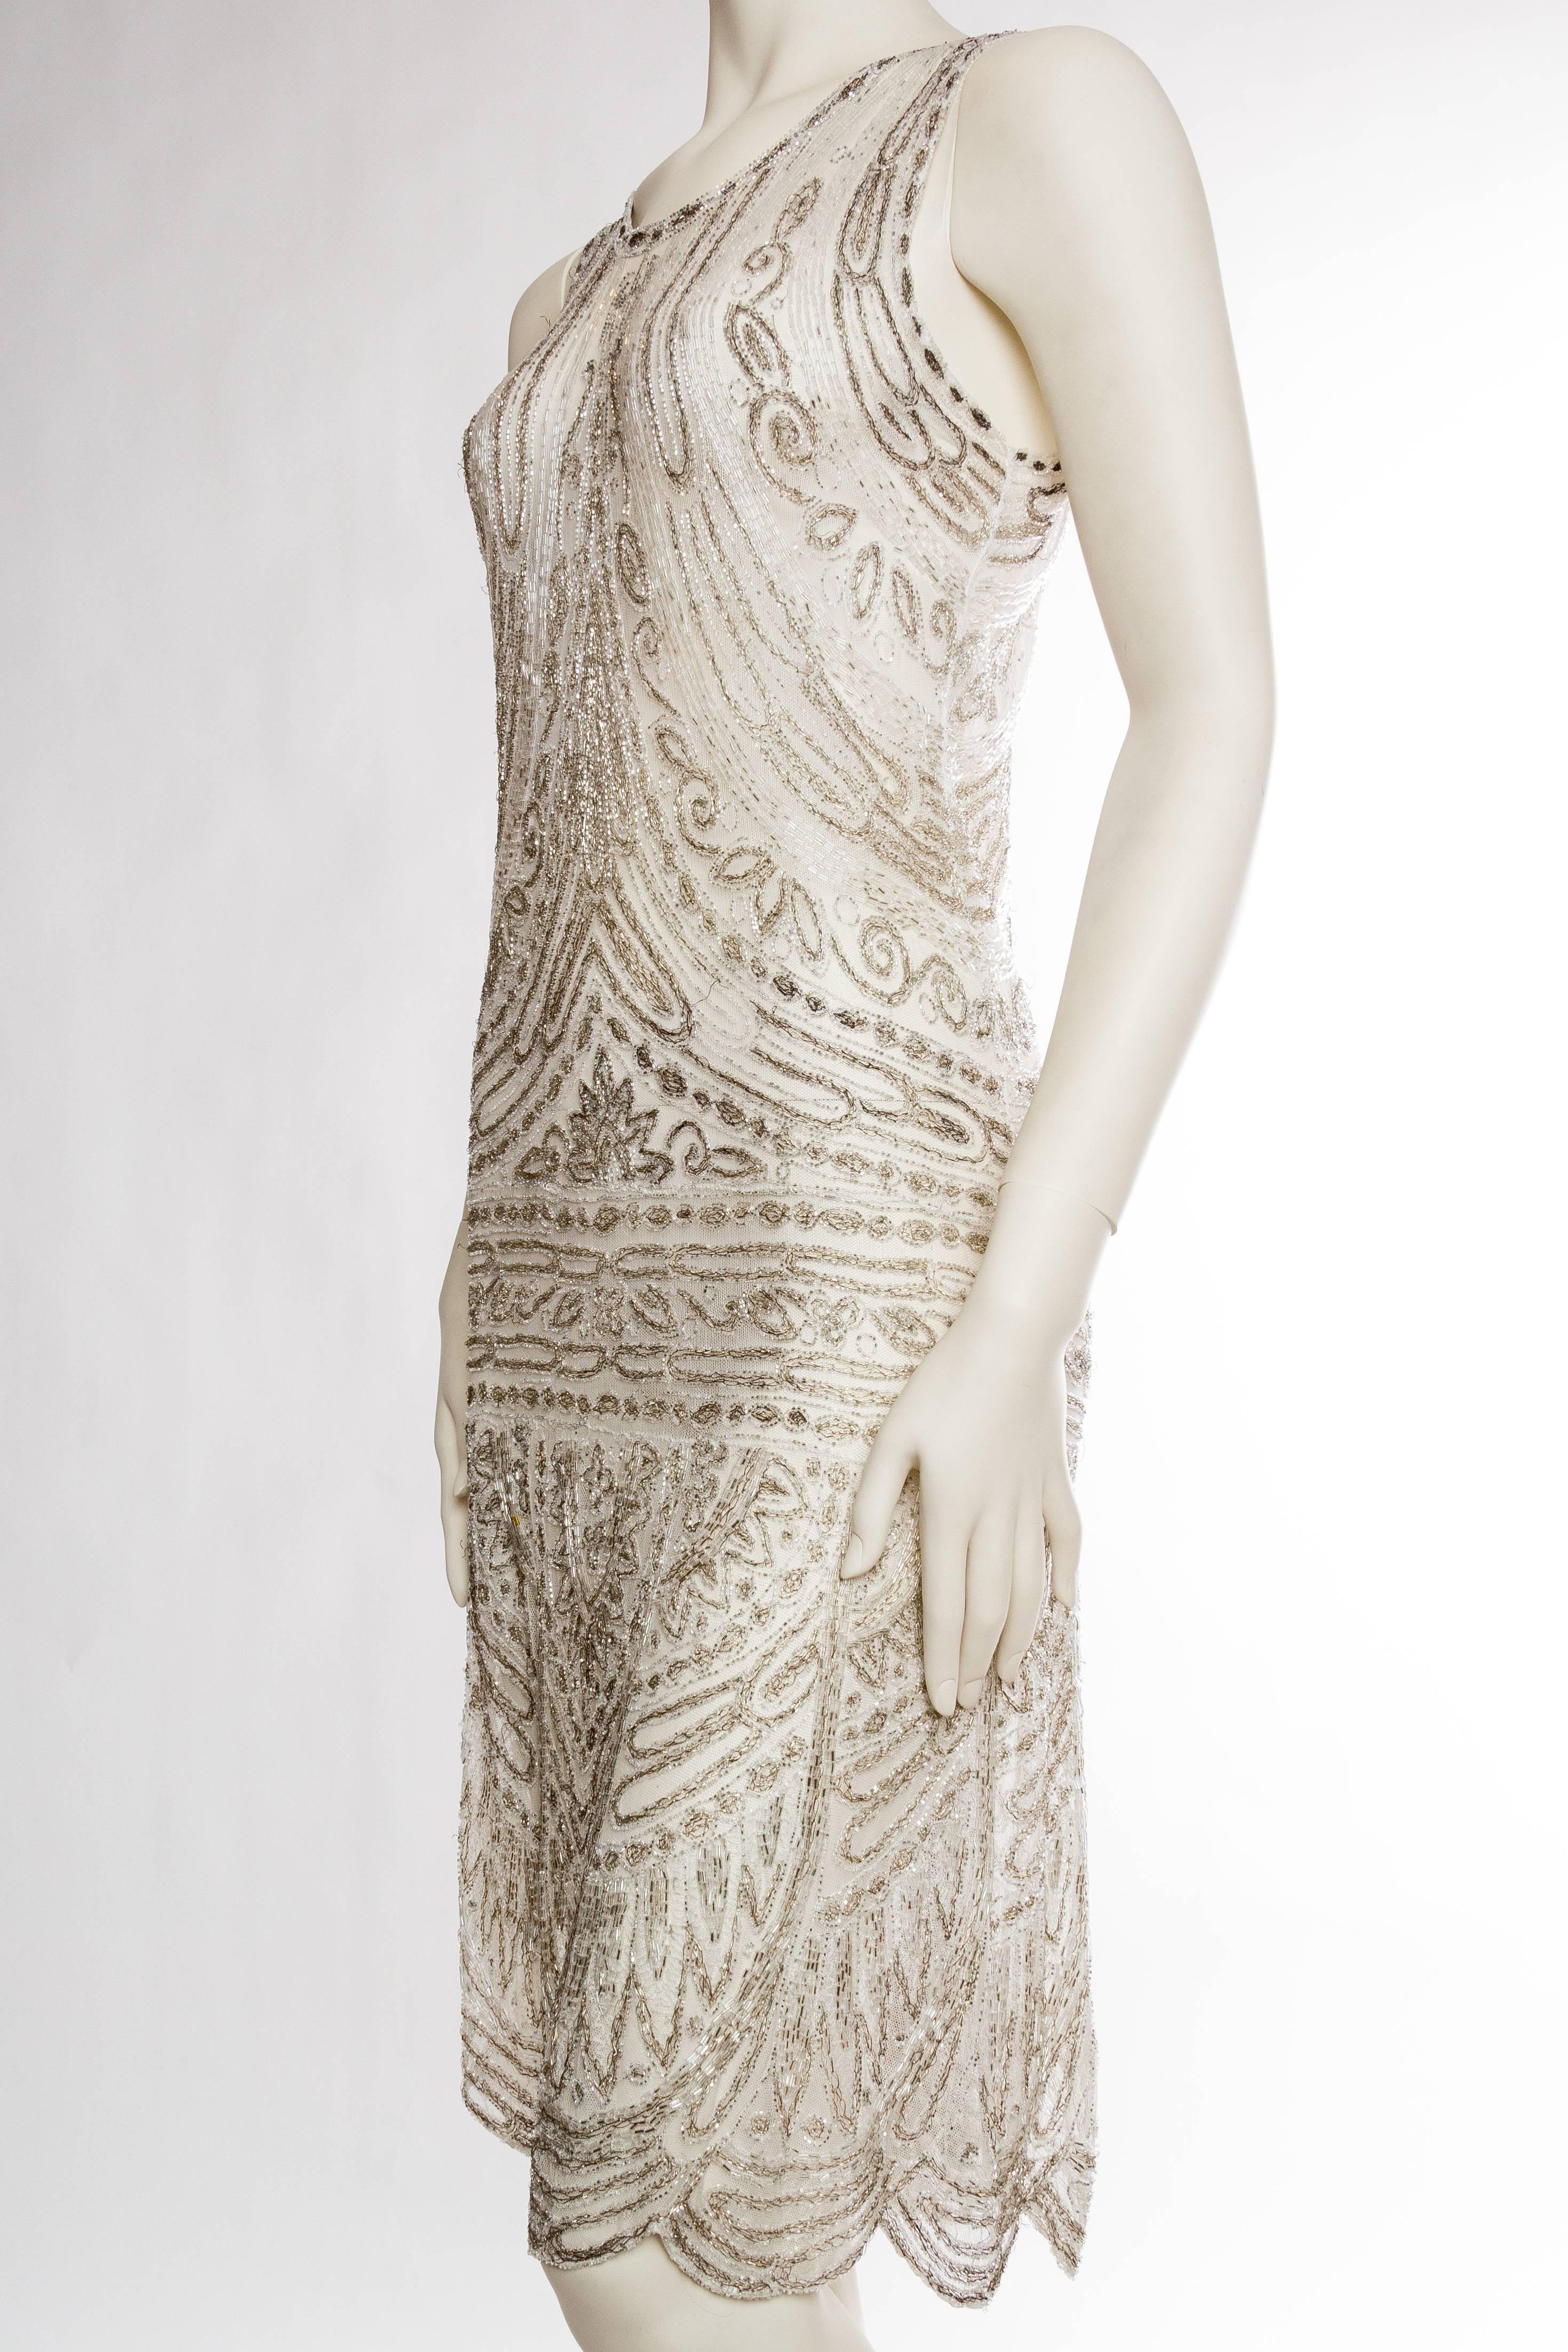 Women's 1920s Beaded Net Dress Embroidered with Silver Threads